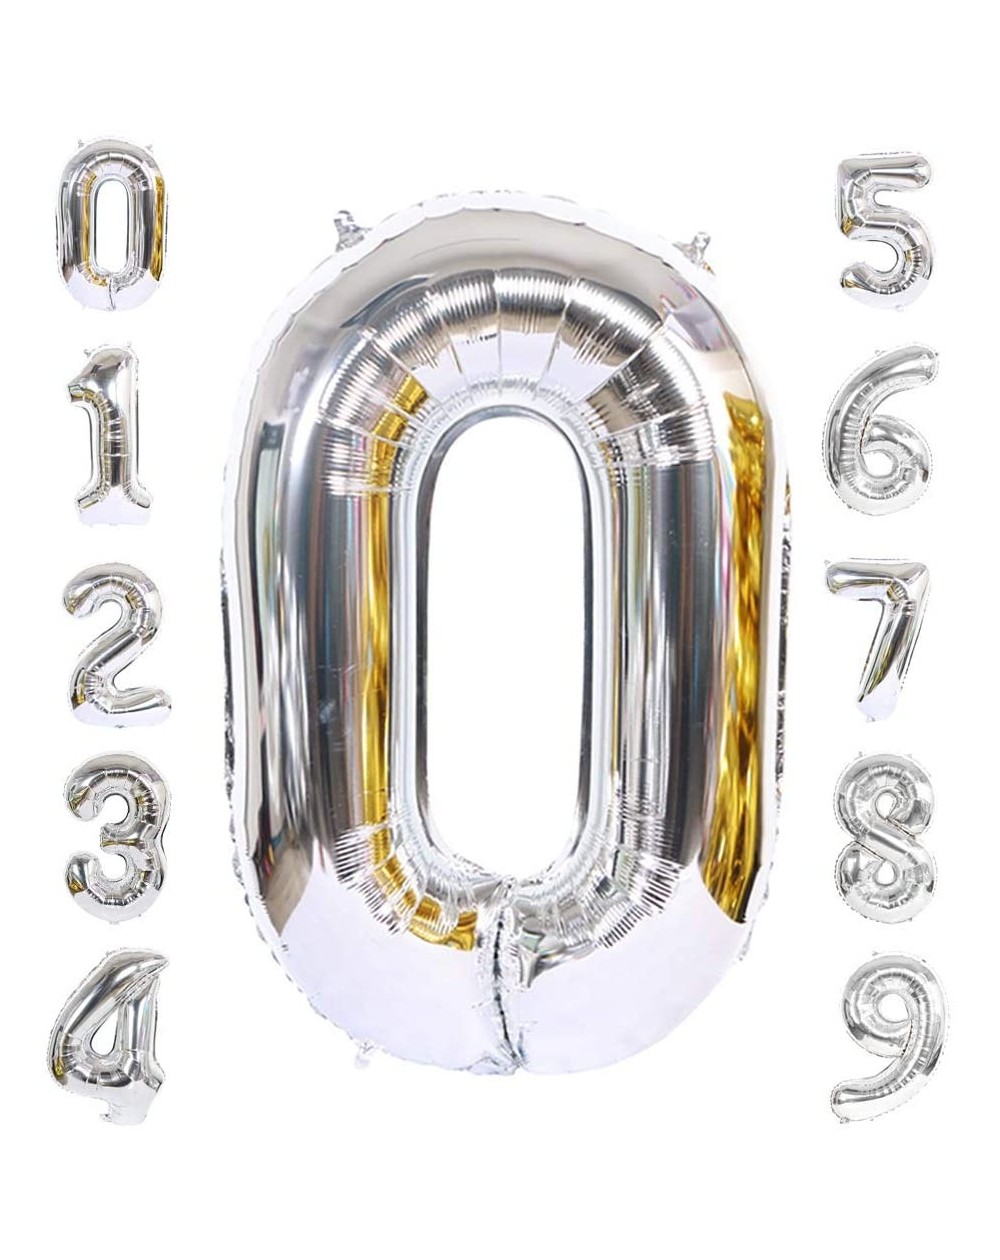 Balloons 40 Inch Silver Alphabet Letter Foil Helium Digital Balloons Number 0 for Birthday Anniversary Party Festival Decorat...